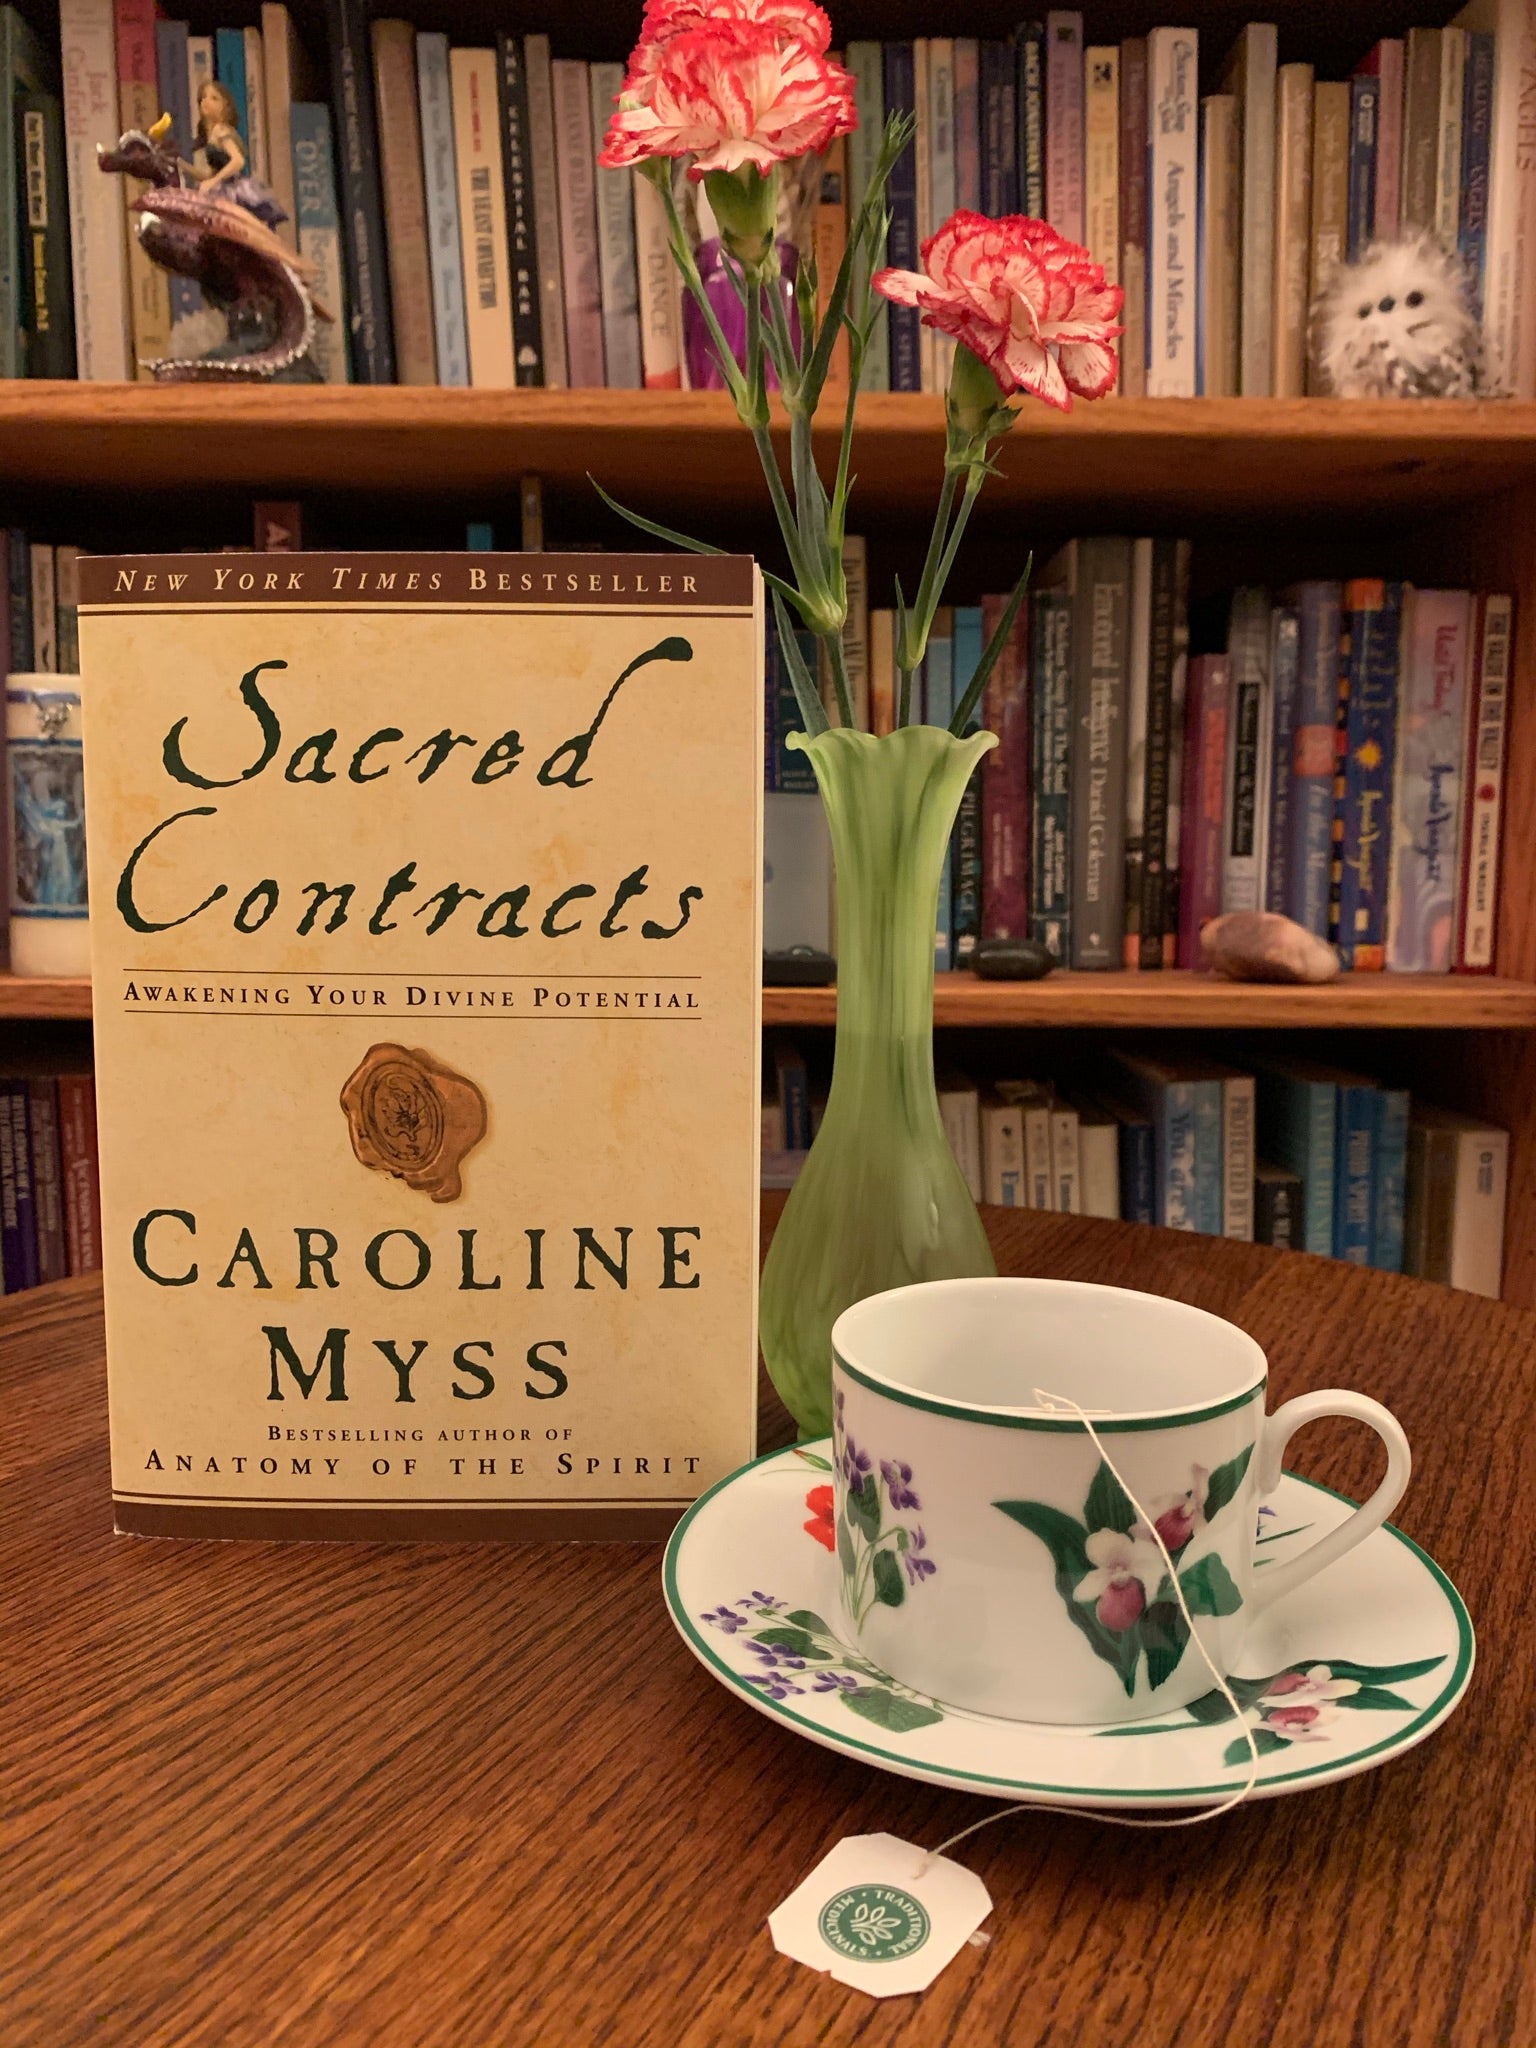 Sacred Contracts by Caroline Myss is a powerful book and guide to finding your own sacred contracts (higher purpose) using archetypes that "build on the works of Jung, Plato" and others. In coming to know your archetypal companions, you also begin to see how to live your life in ways that make the best use of your personal power and lead you to fulfill your greatest - in fact, your divine - potential." Myss is a best-selling author, medical intuitive and spiritual teacher. Cost is $17.99.